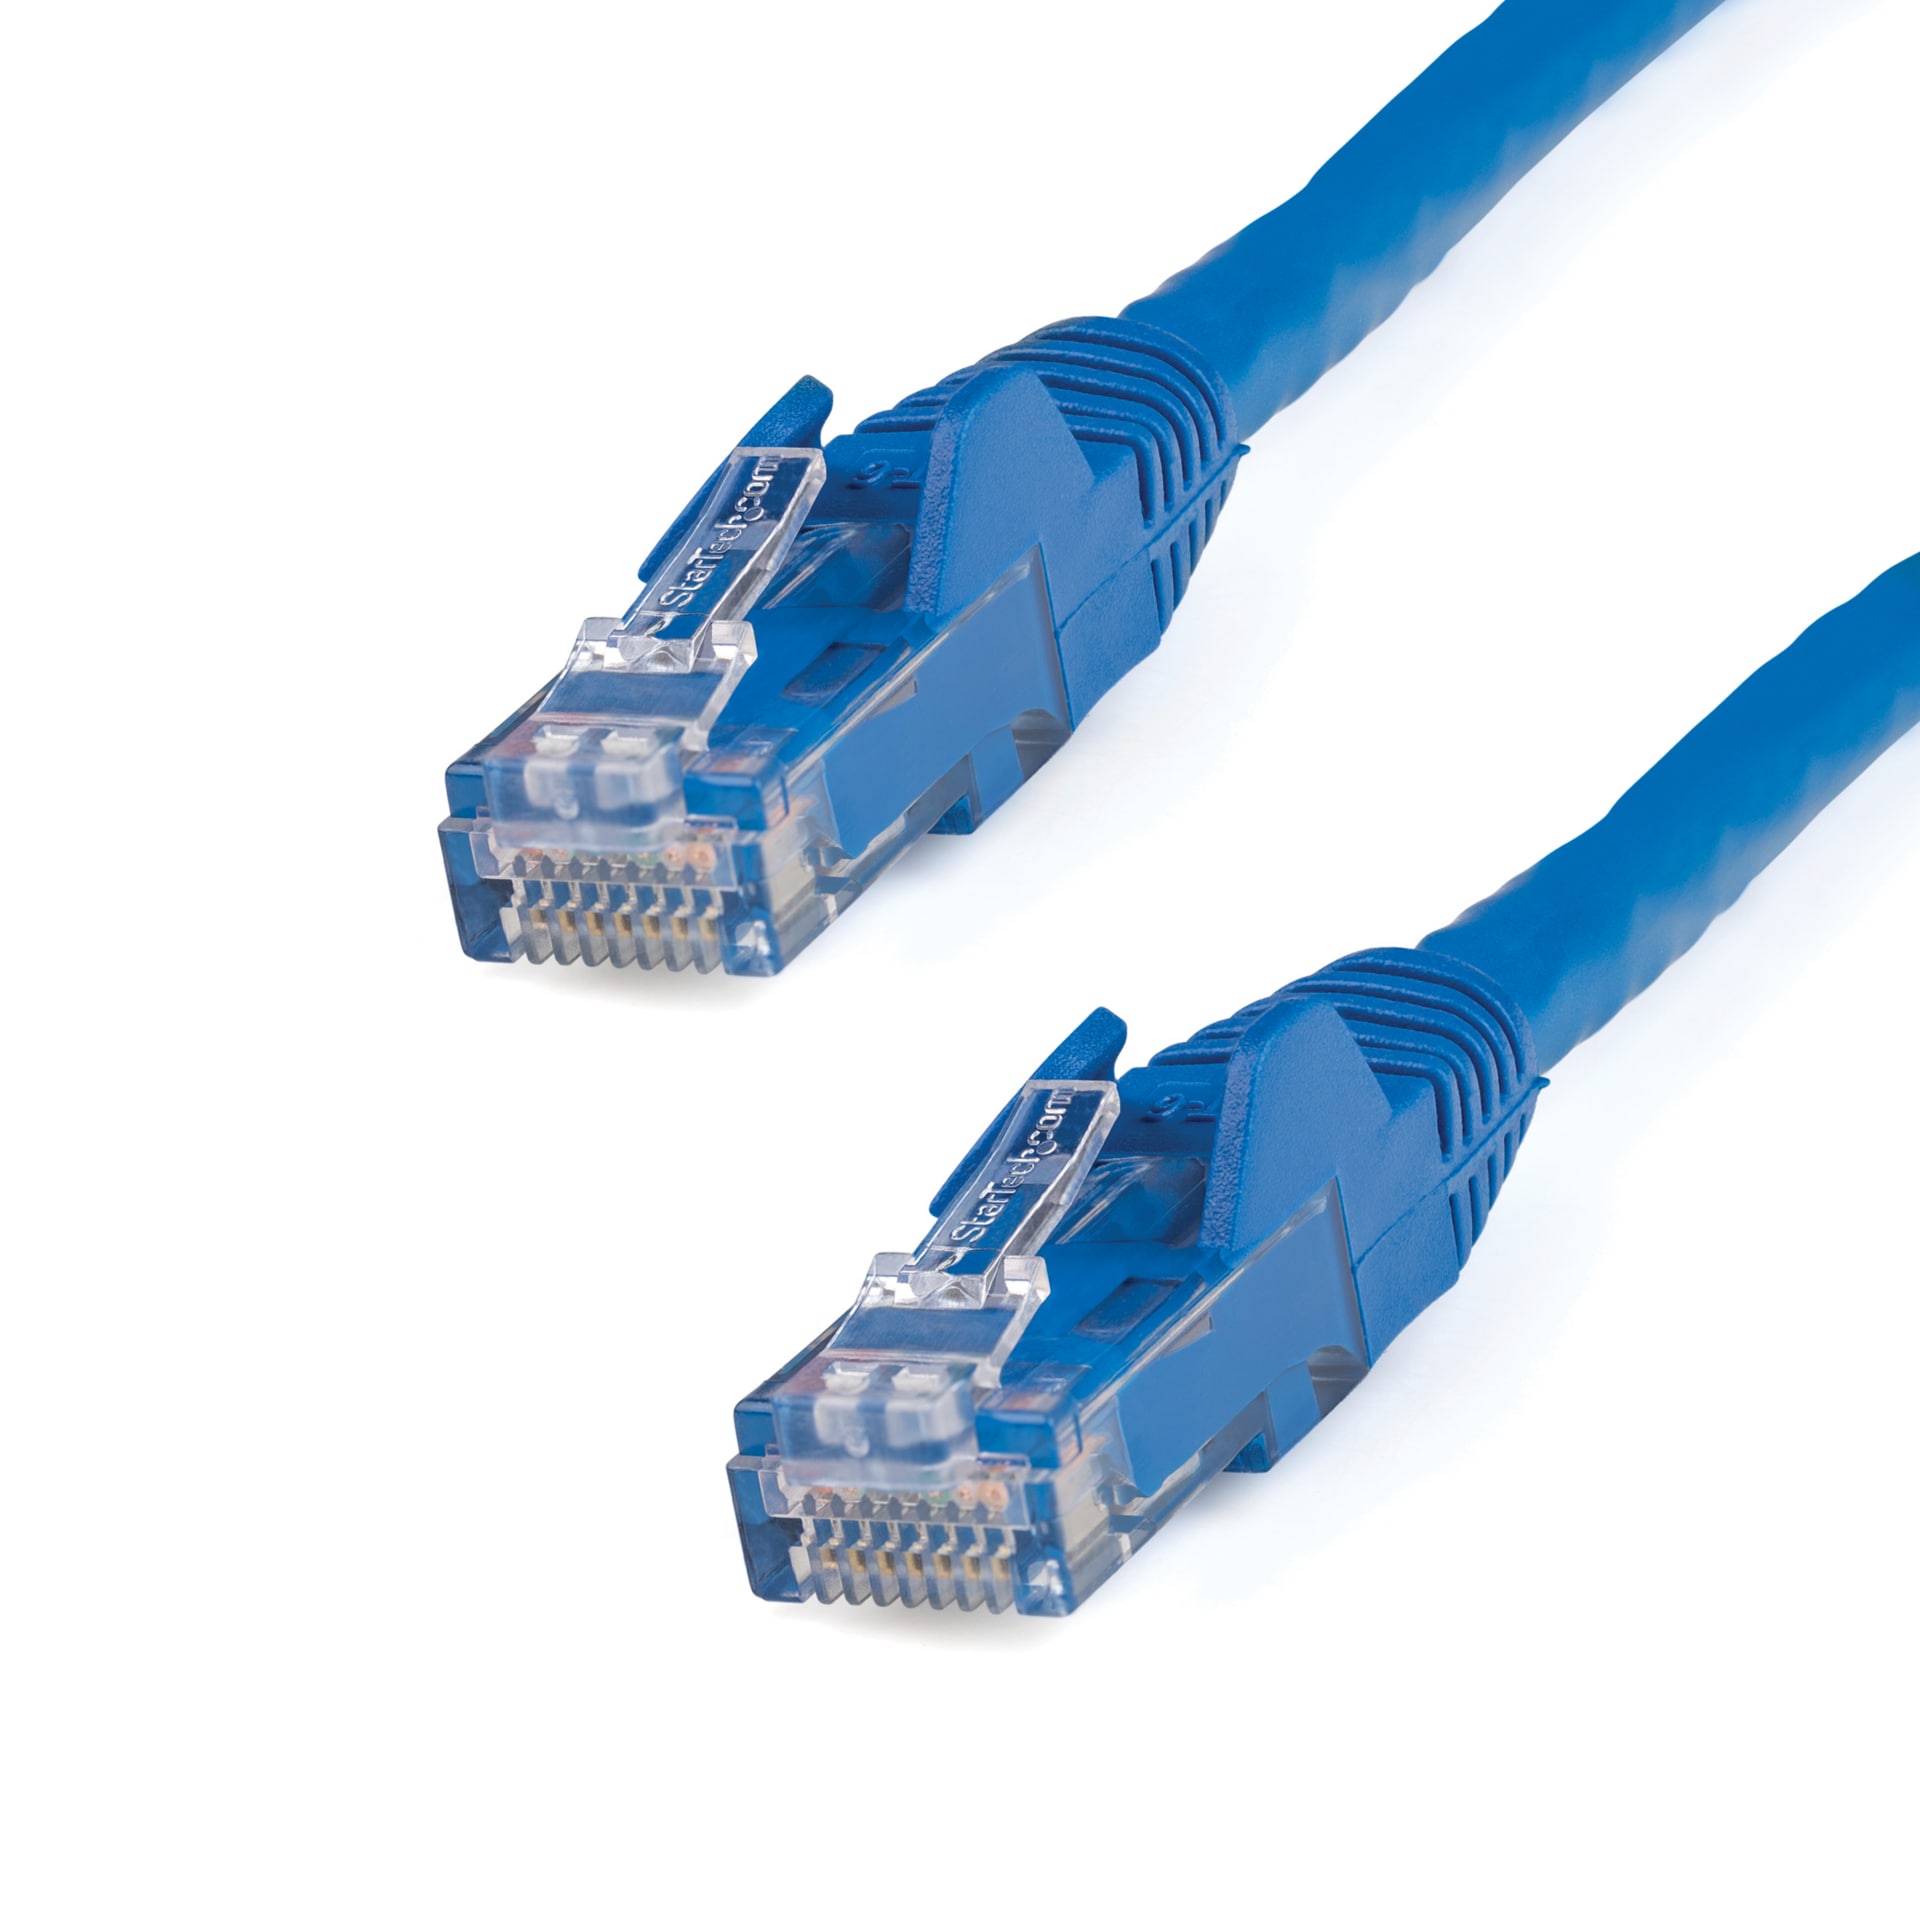 StarTech.com 10ft Black CAT6 Ethernet Cable - Snagless Category 6 Patch Cord - CAT 6 PoE++ Gigabit Network Cable -  M/M